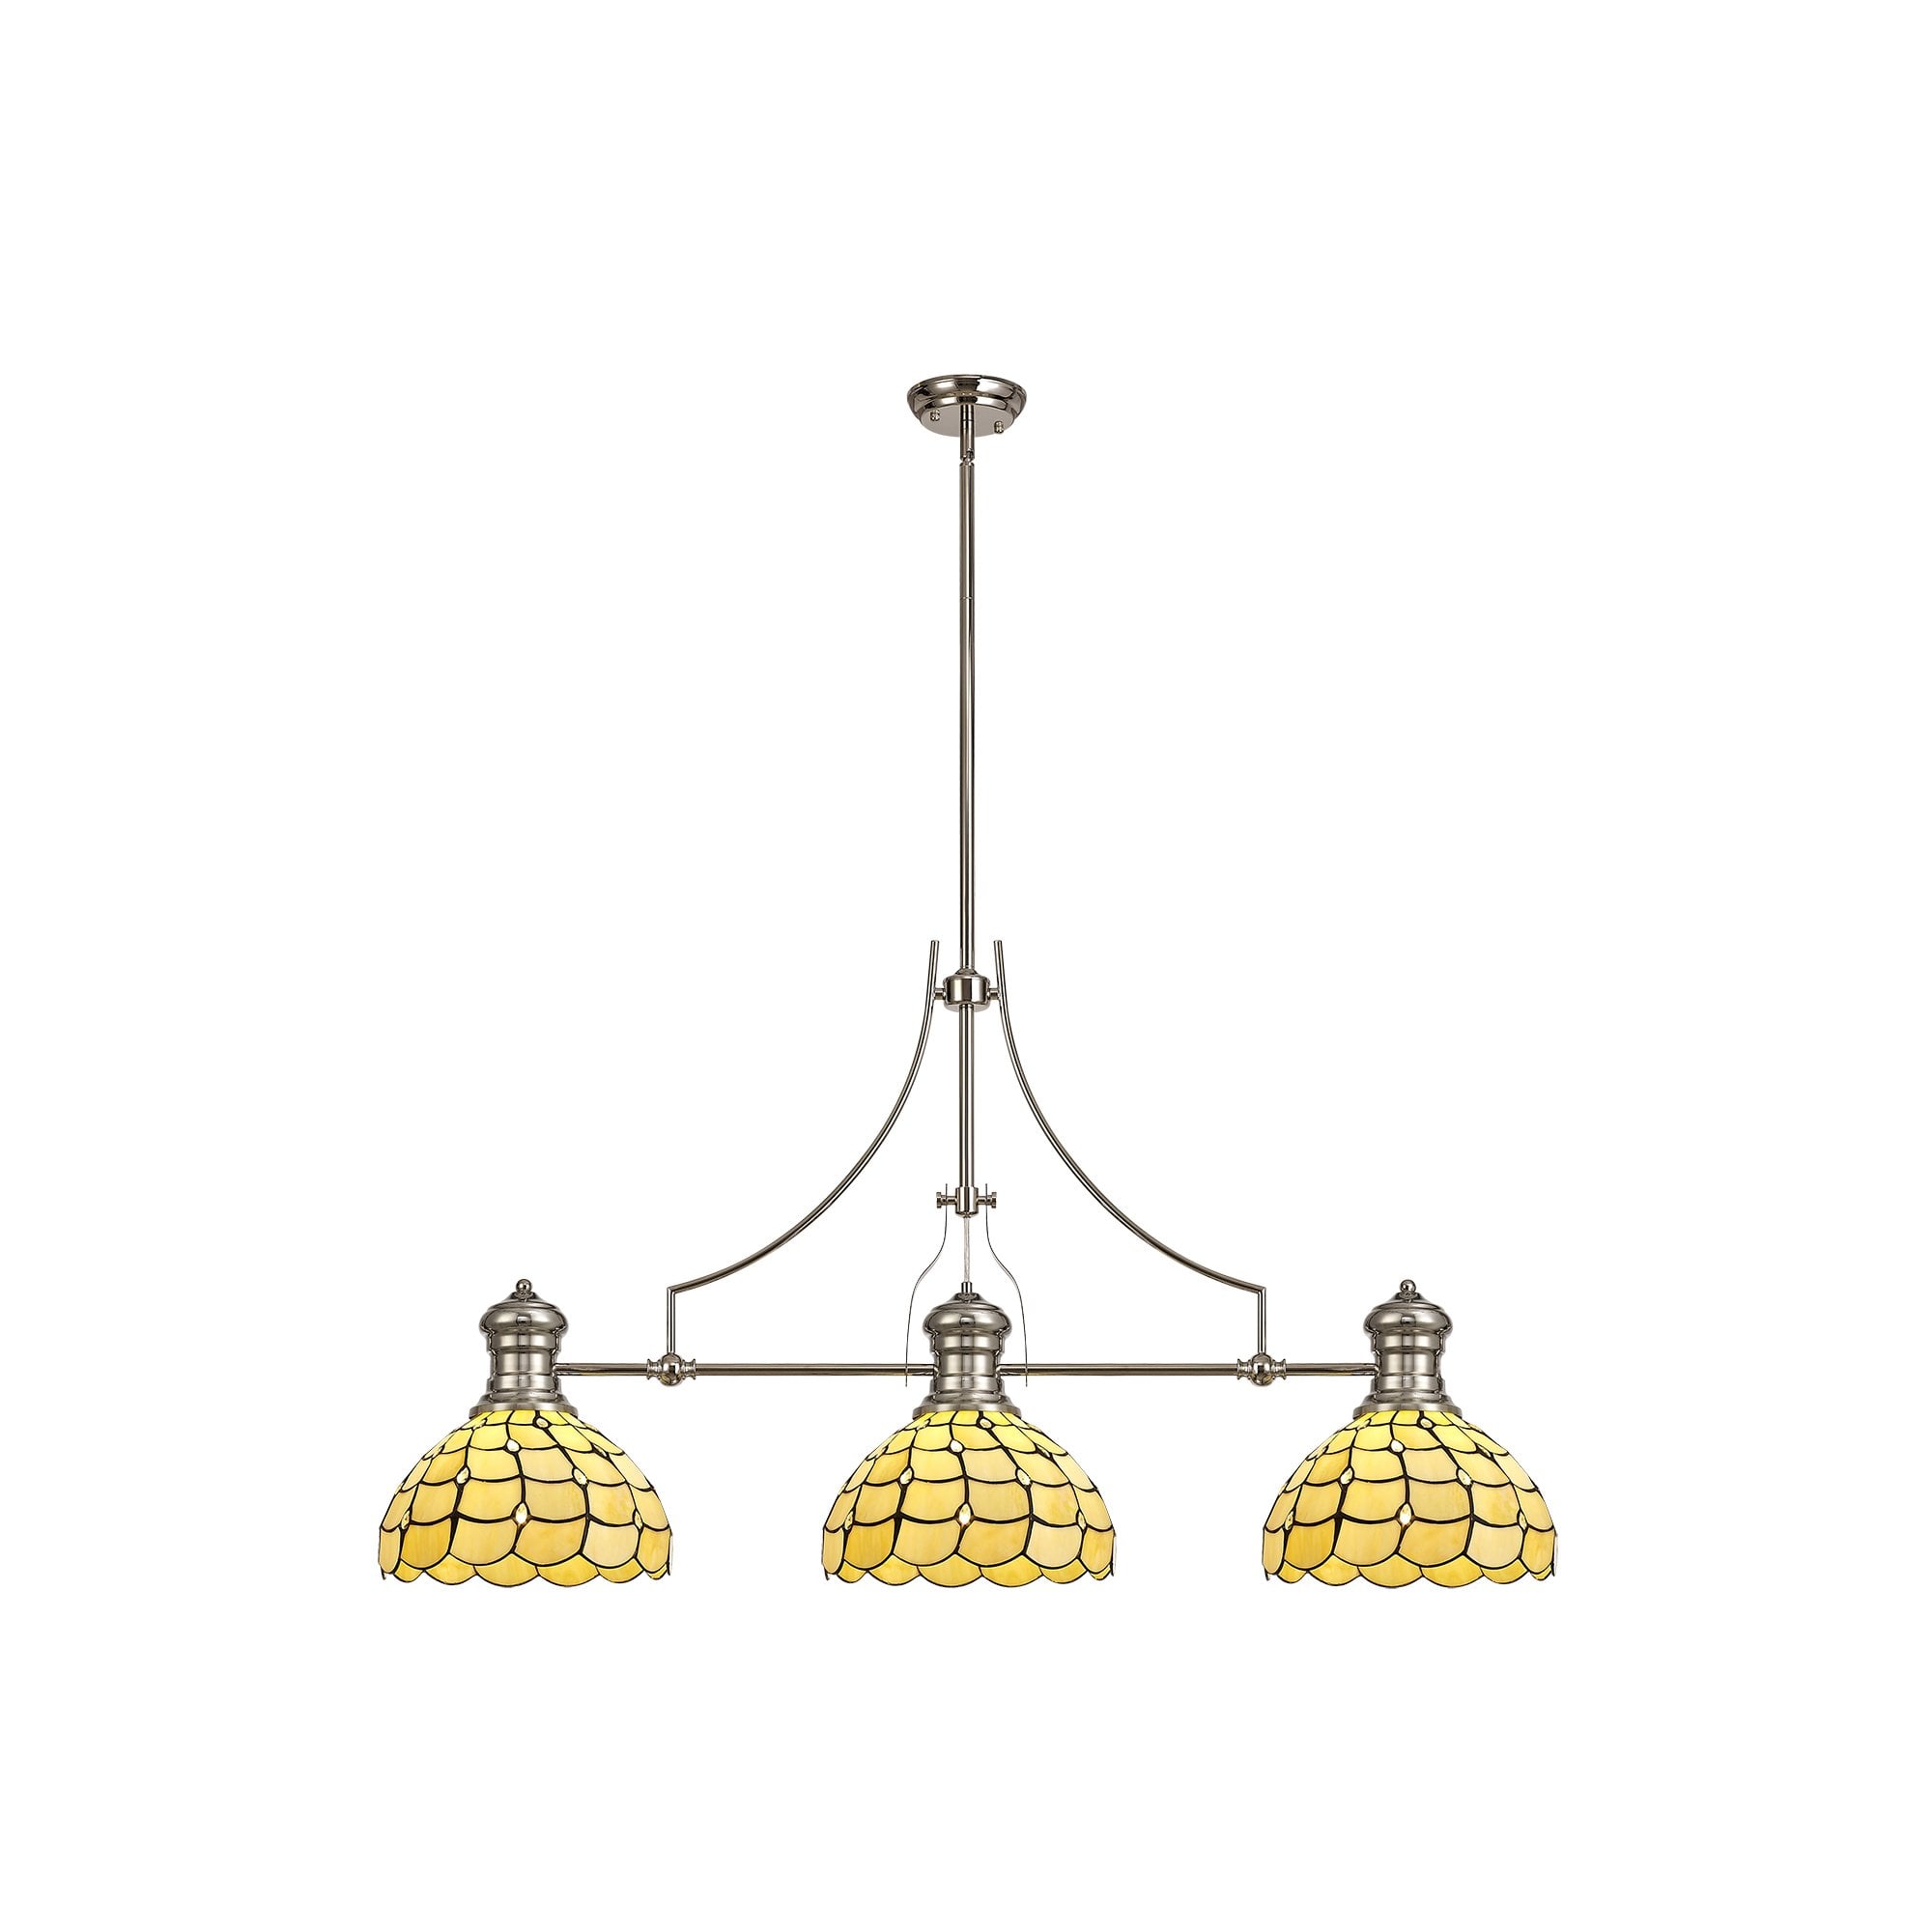 3 Light Telescopic Pendant E27 With 30cm Tiffany Shade, Polished Nickel/Beige/Clear Crystal